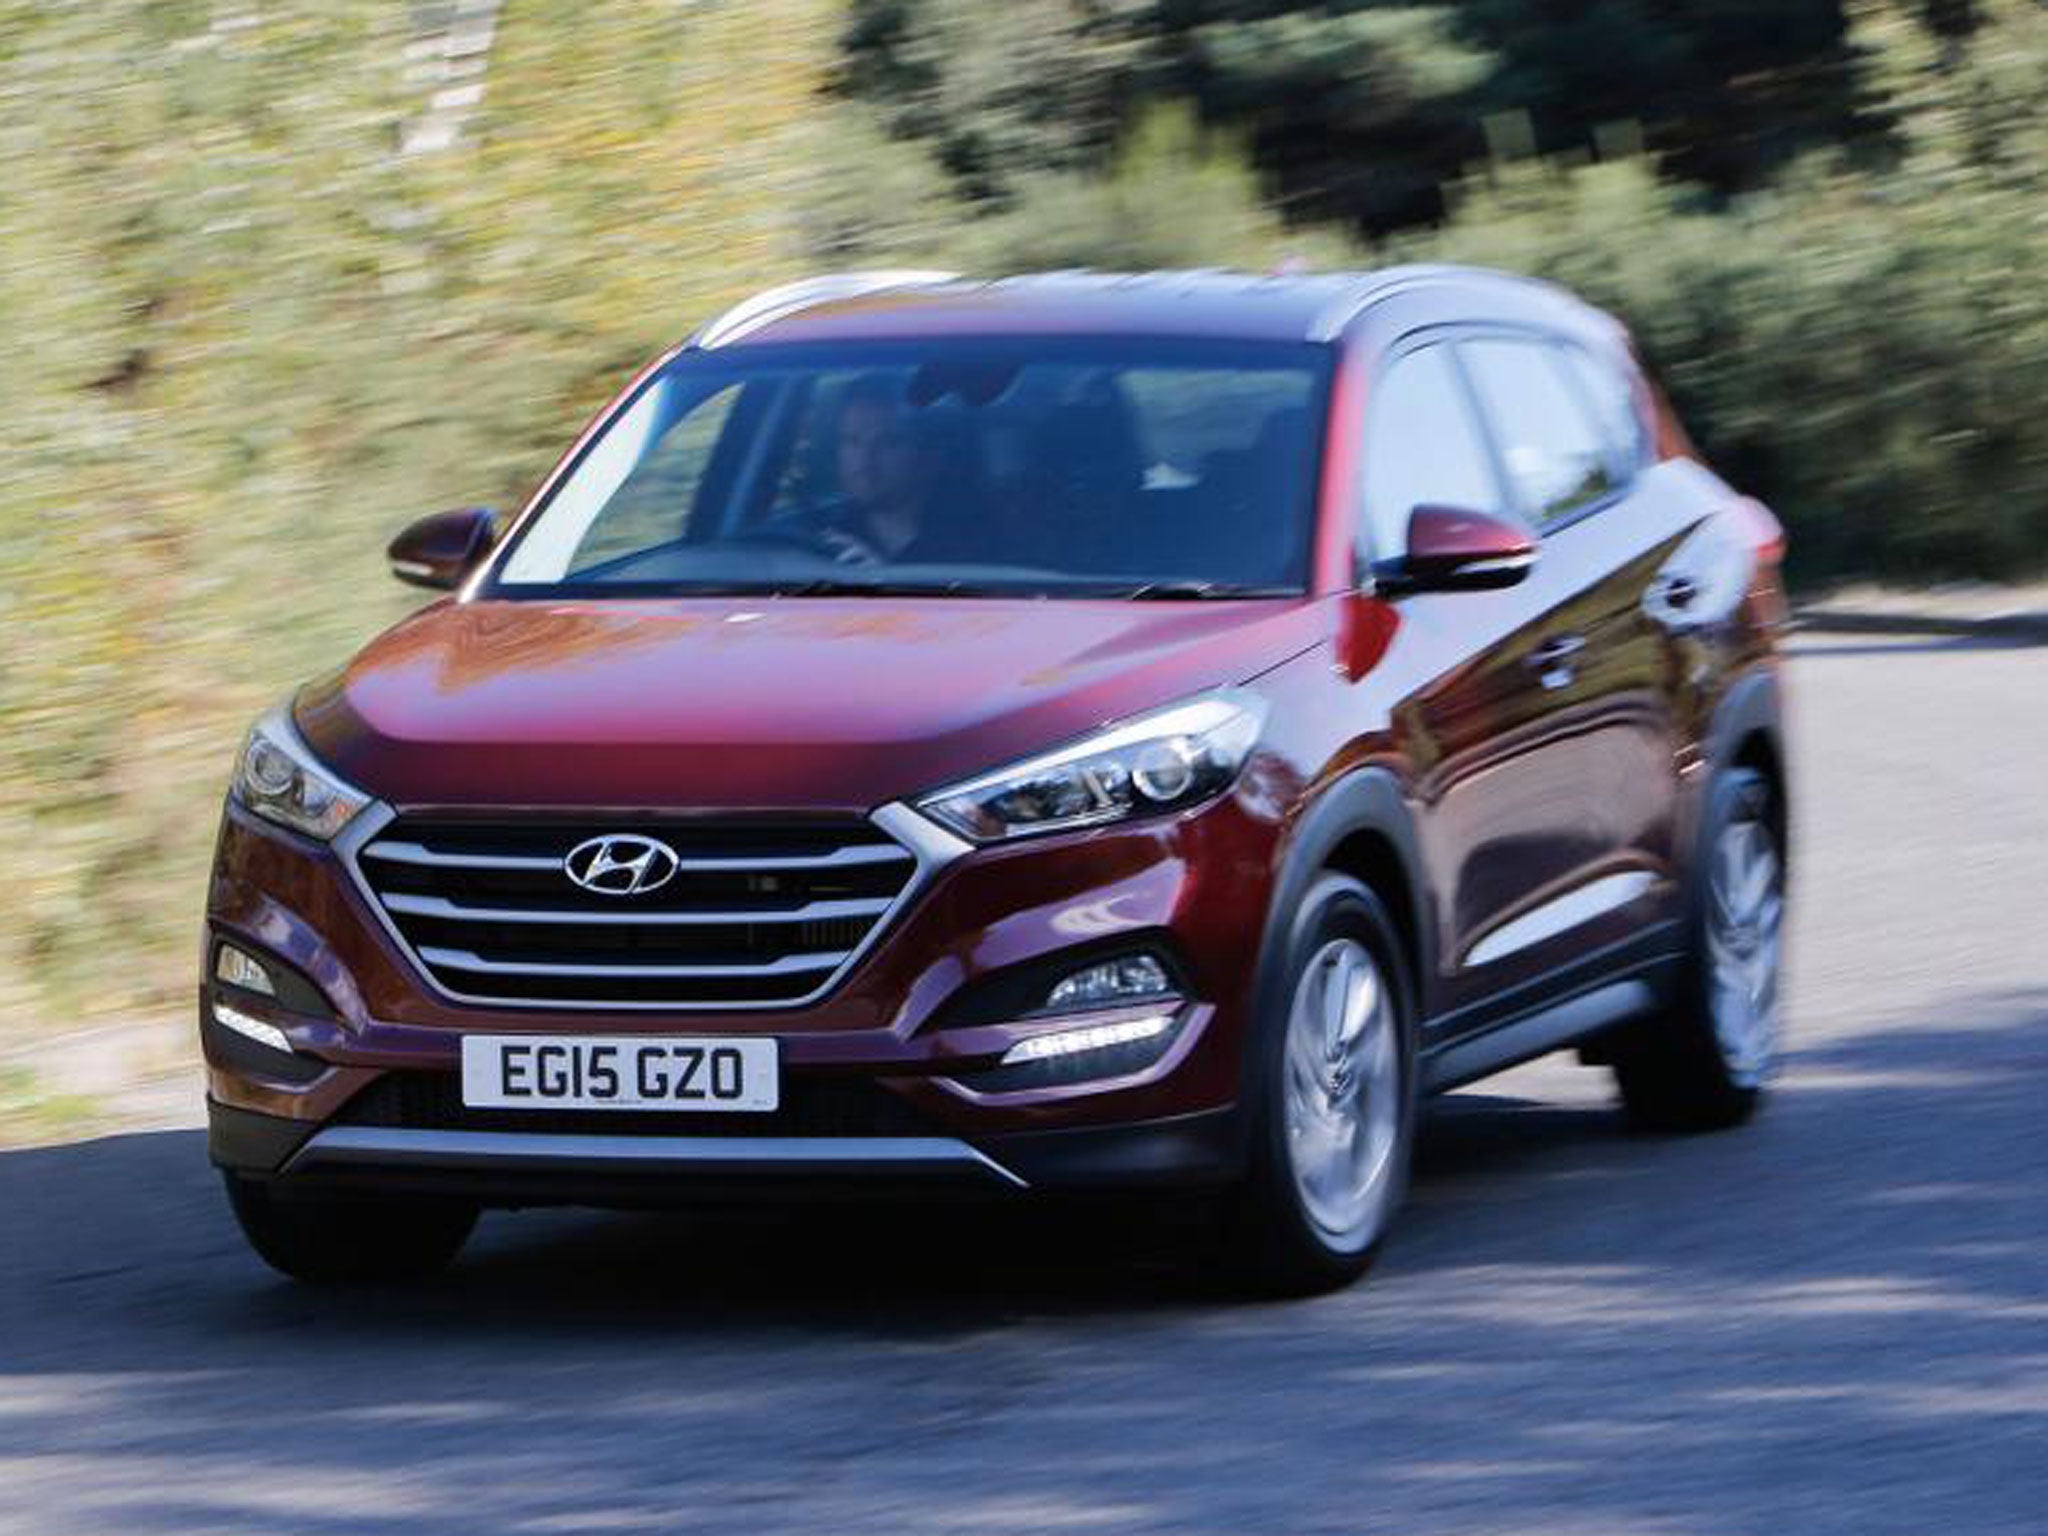 The Tucson’s performance belies the model’s height and two-tonne kerbweight